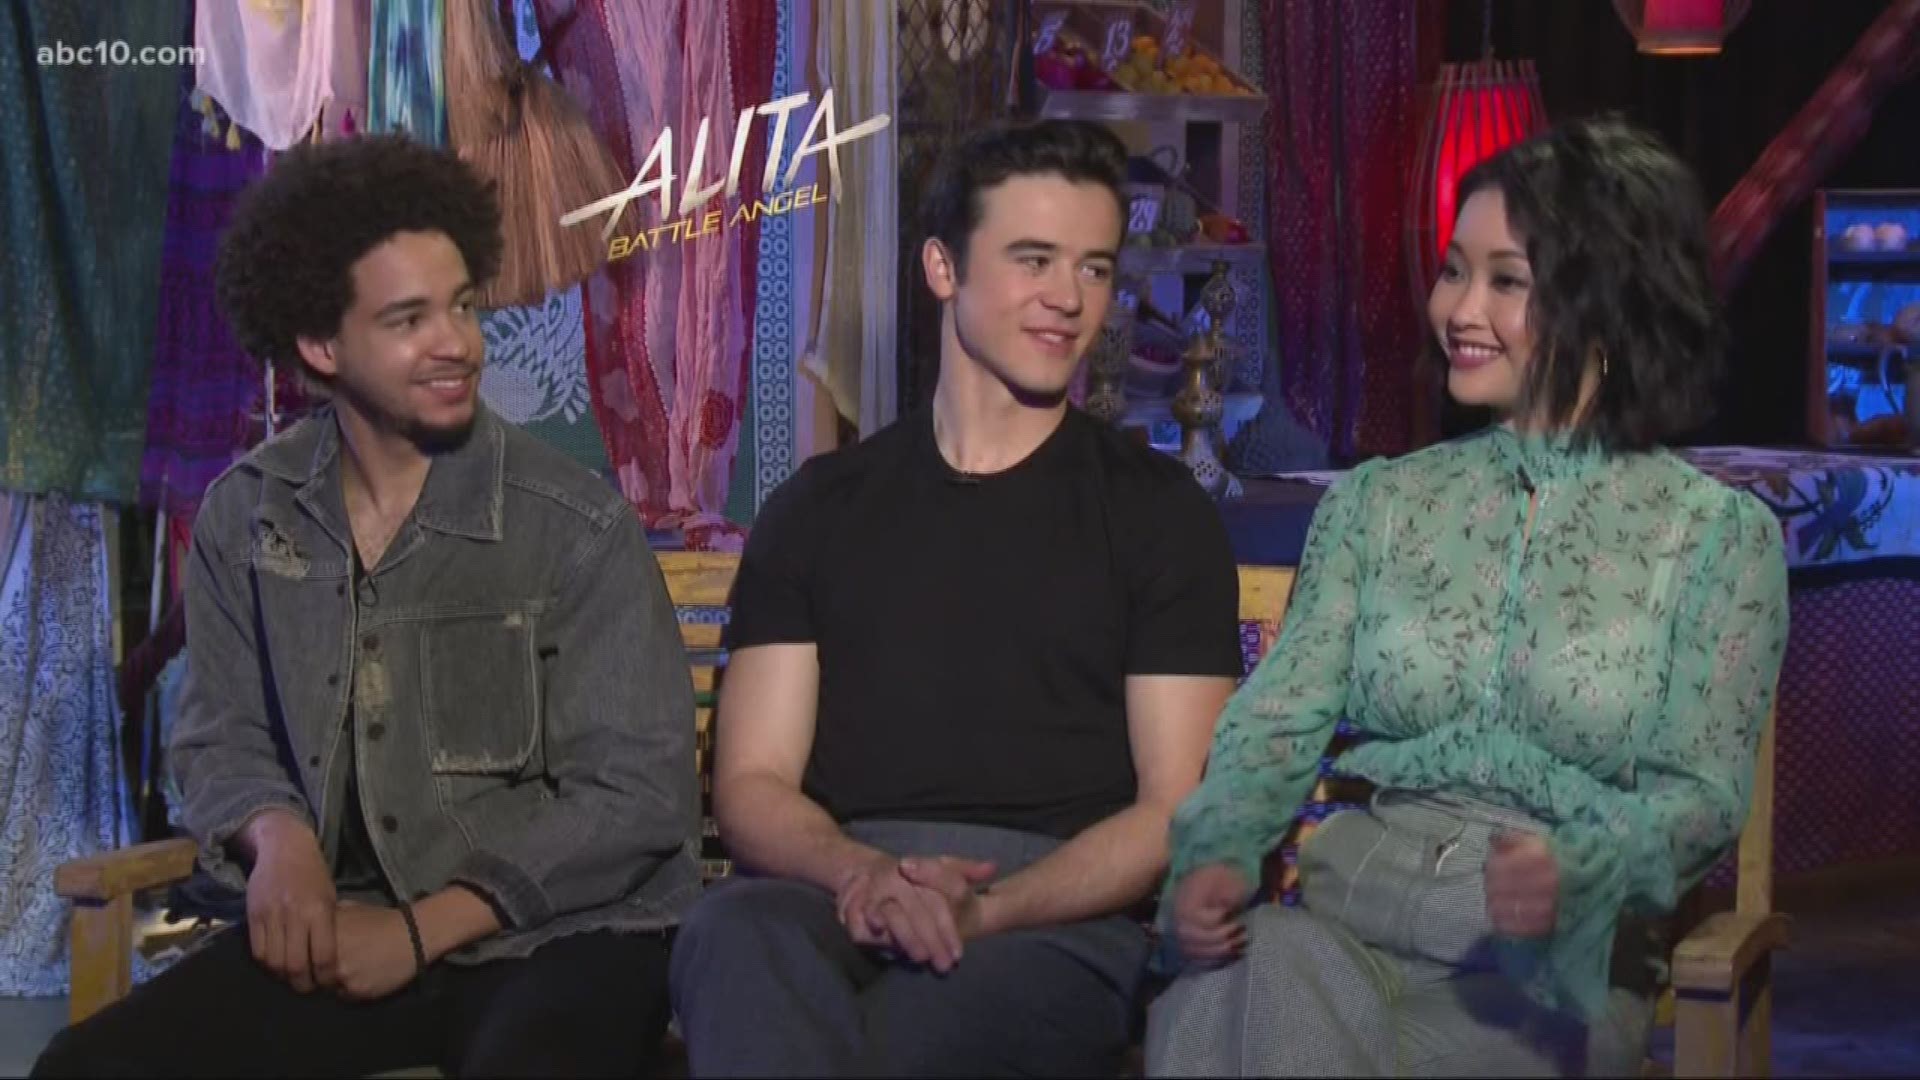 Mark S. Allen sat down with Lana Condor, Keean Johnson, and Jorge Lendeborg Jr. to talk about one of the most anticipated movies of the year, "Alita: Battle Angel."